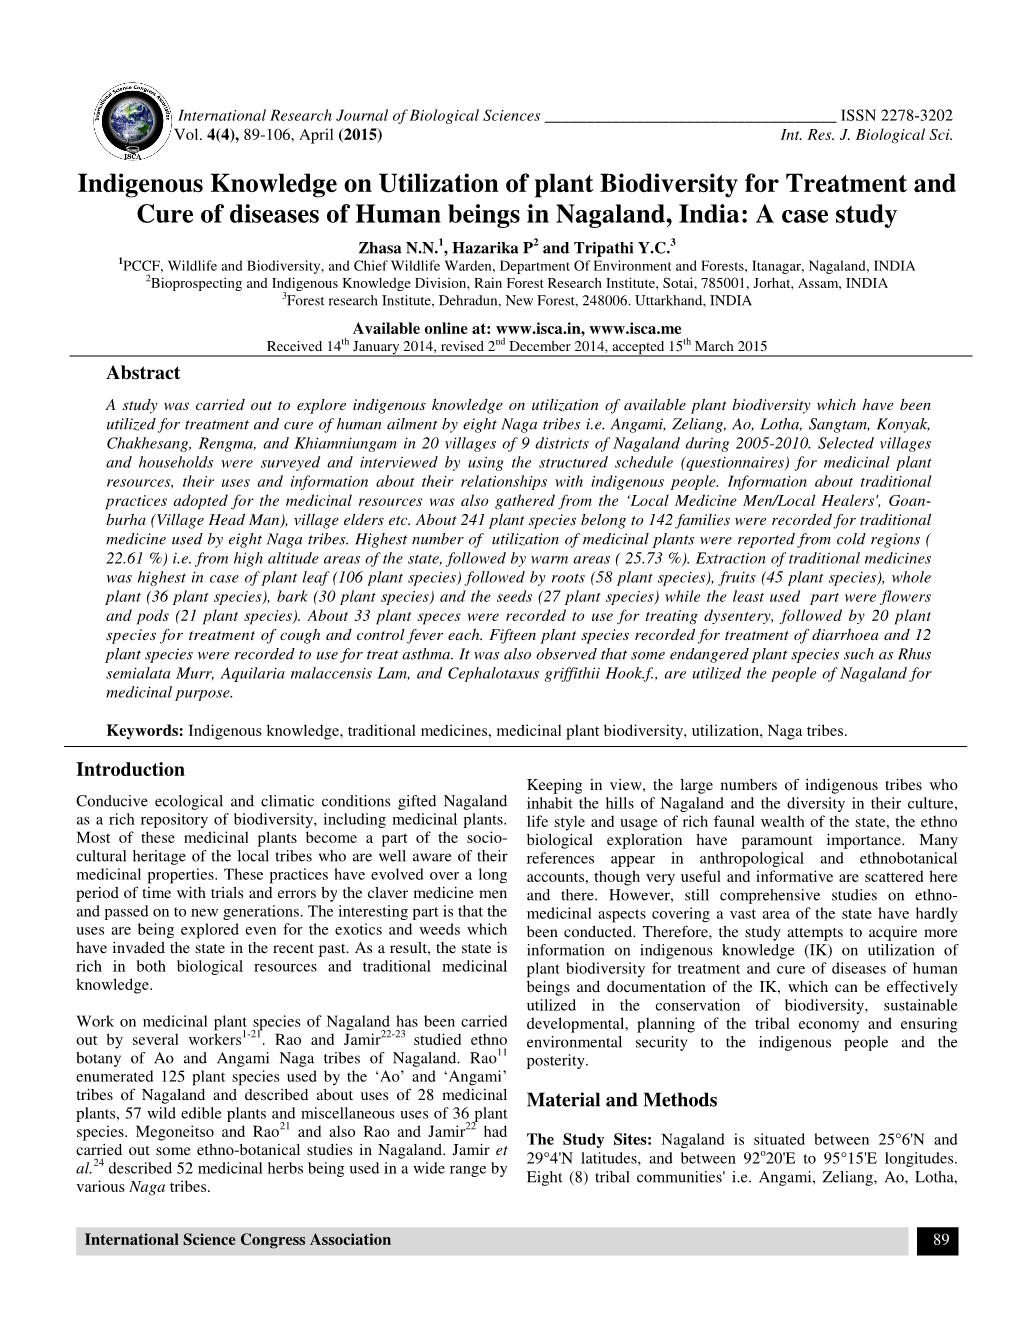 Indigenous Knowledge on Utilization of Plant Biodiversity for Treatment and Cure of Diseases of Human Beings in Nagaland, India: a Case Study